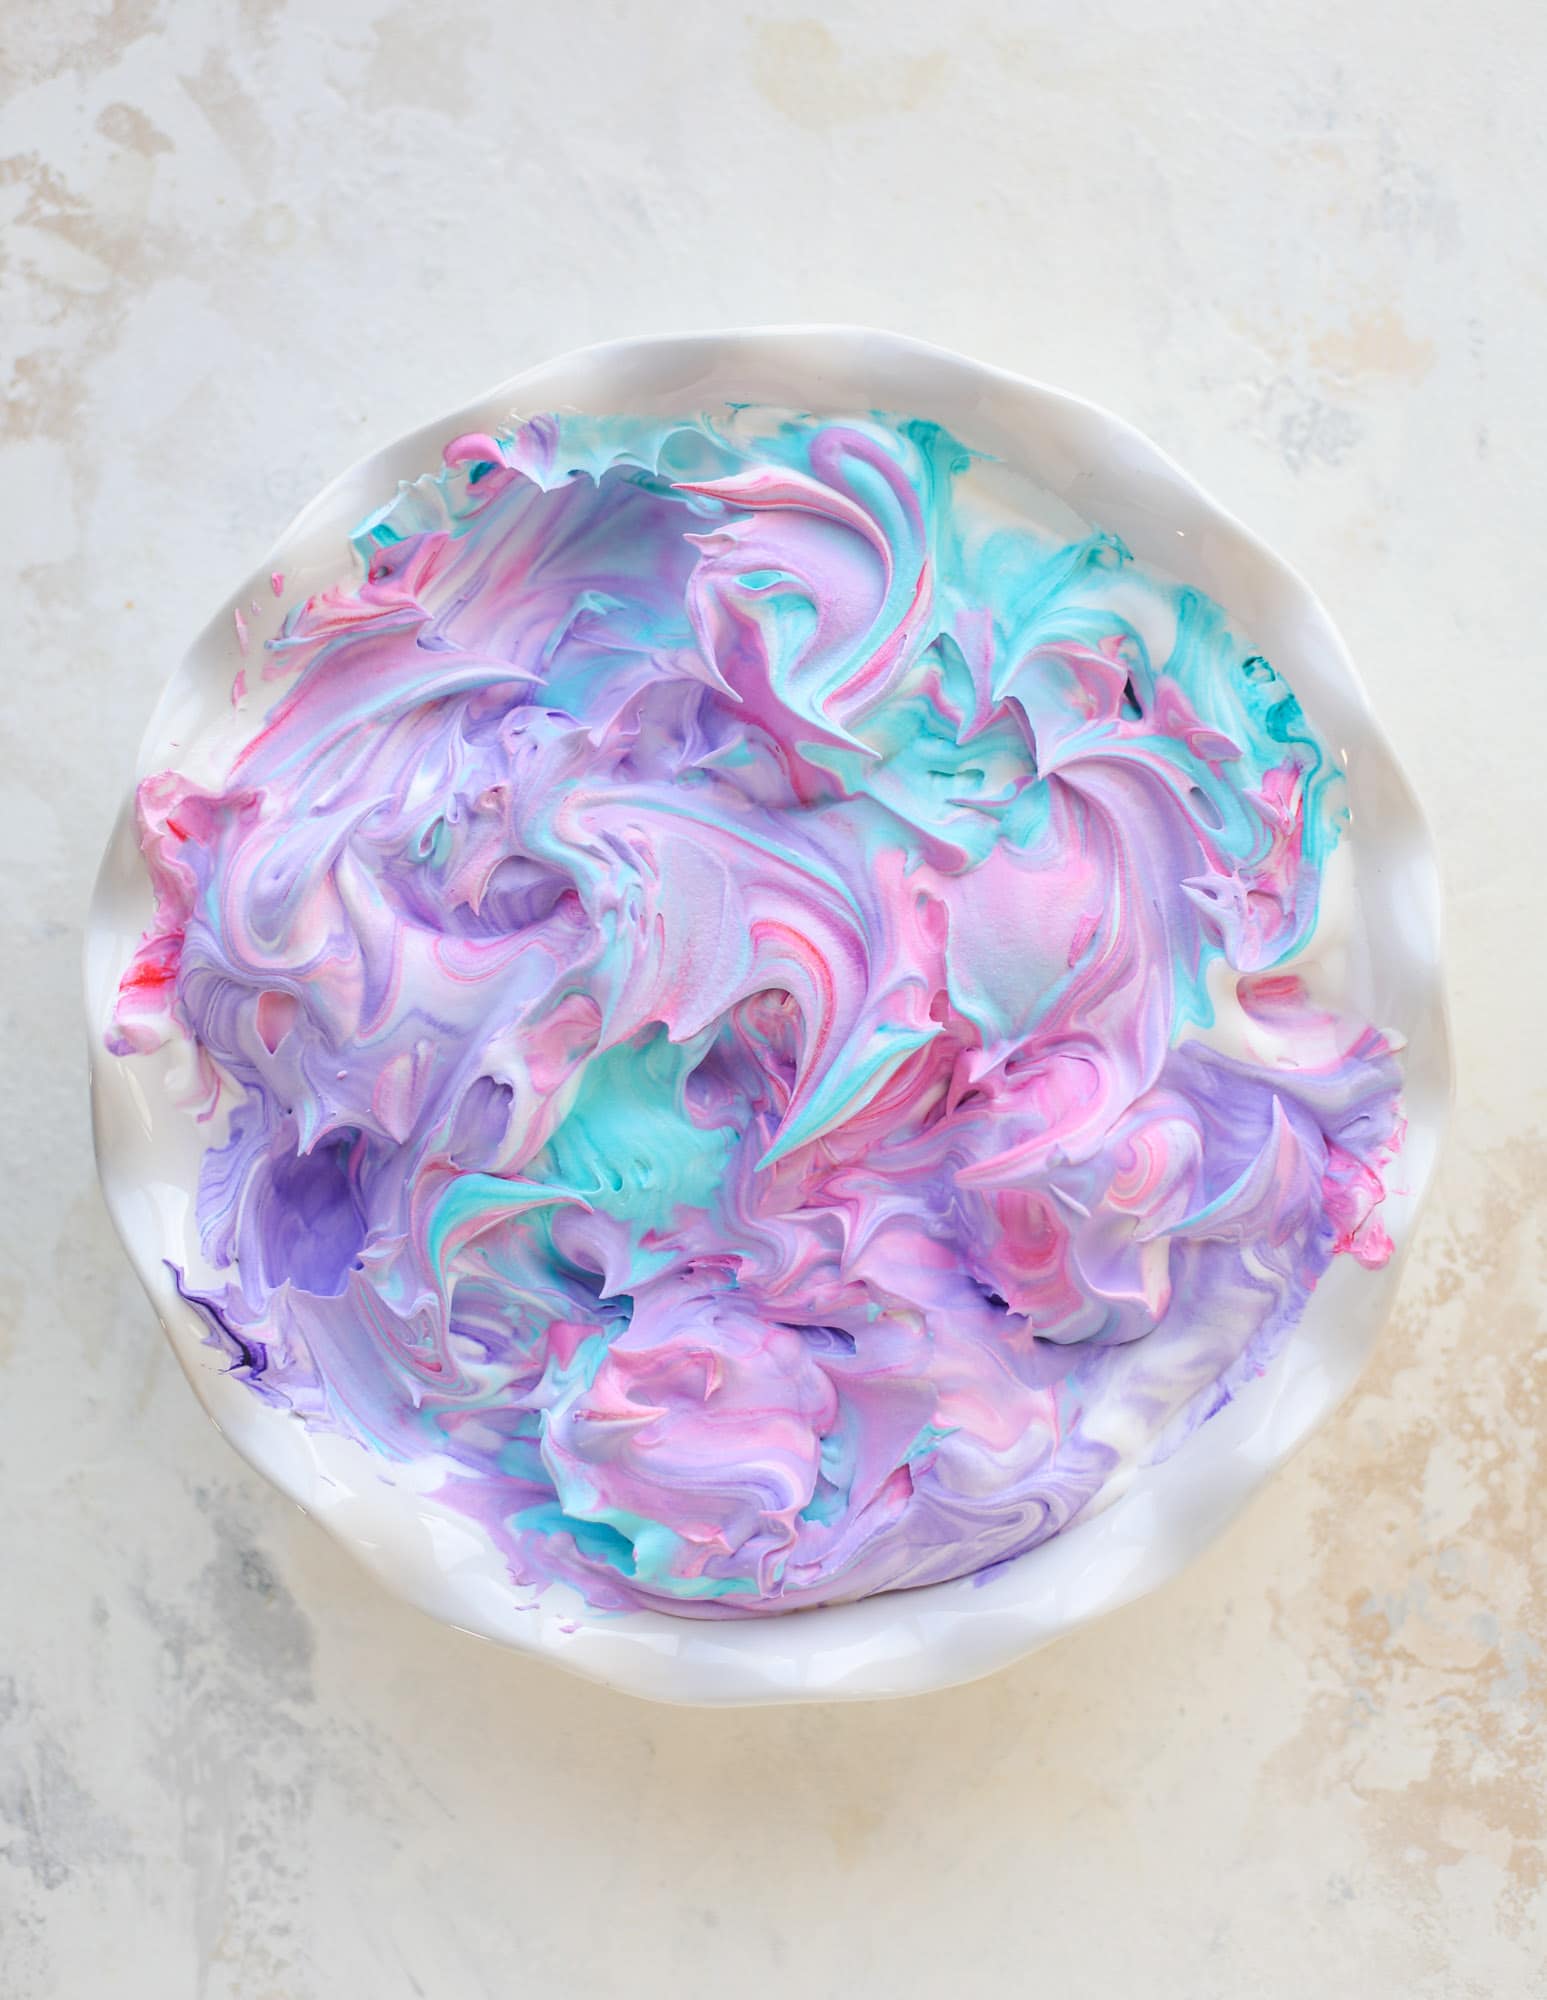 This is how to dye eggs with cool whip! It's so fun, super kid-friendly and ridiculously easy too. I love using this method to make unicorn eggs!